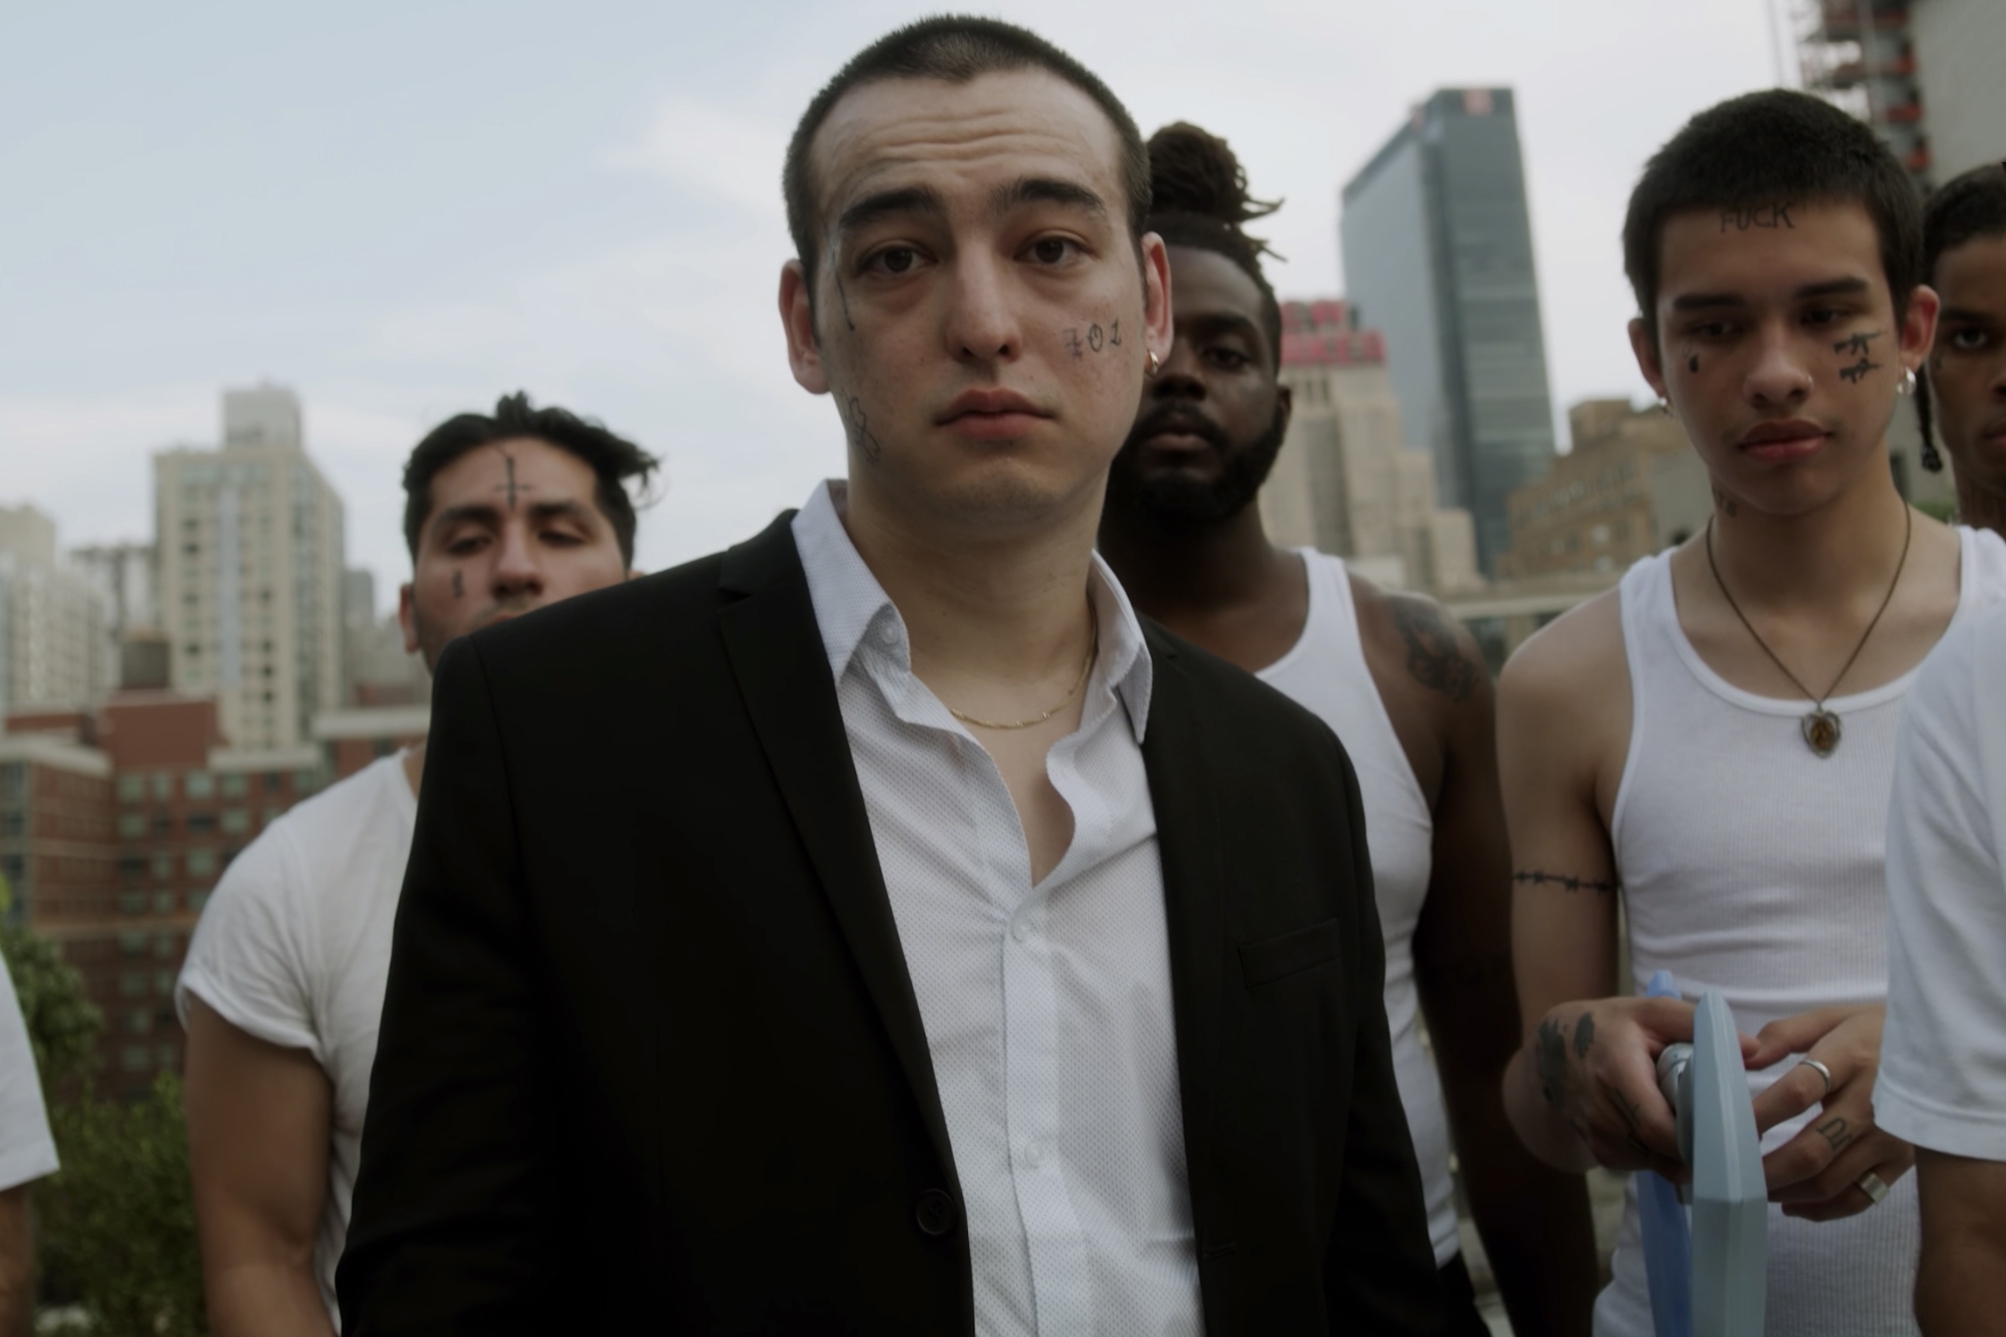 Joji Shares Can T Get Over You Featuring Clams Casino Sidewalk Hustle featuring clams casino sidewalk hustle